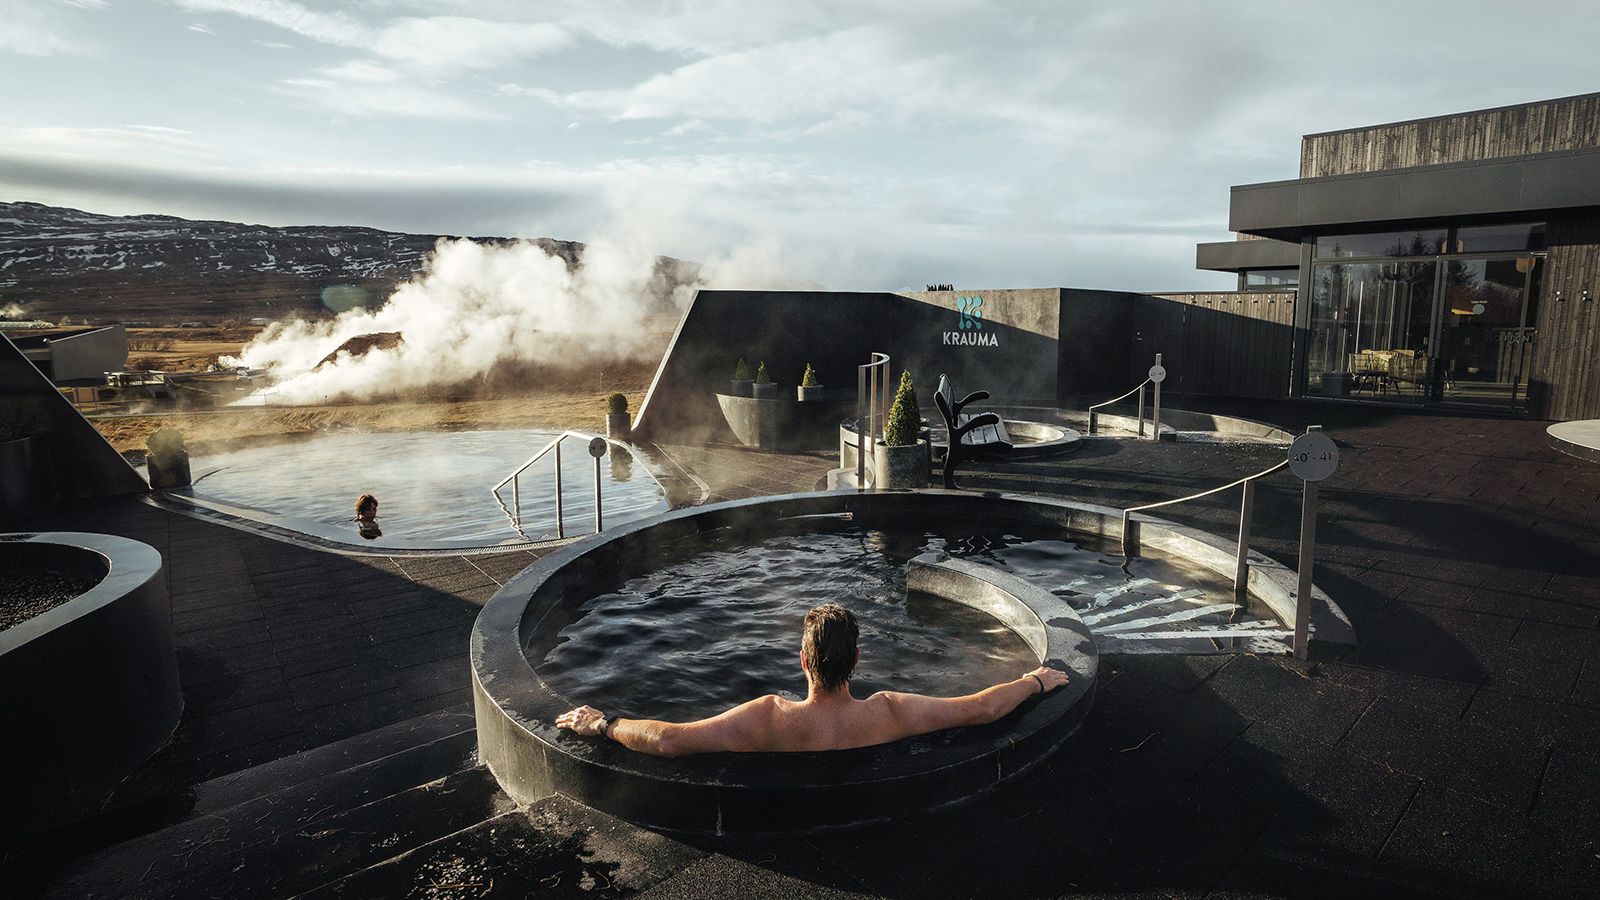 <strong>Krauma: </strong>Only an hour from Reykjavik, this sleek geothermal spa has five hot pools filled with geothermal water from Europe's mightiest hot spring, ​​Deildartunguhver.